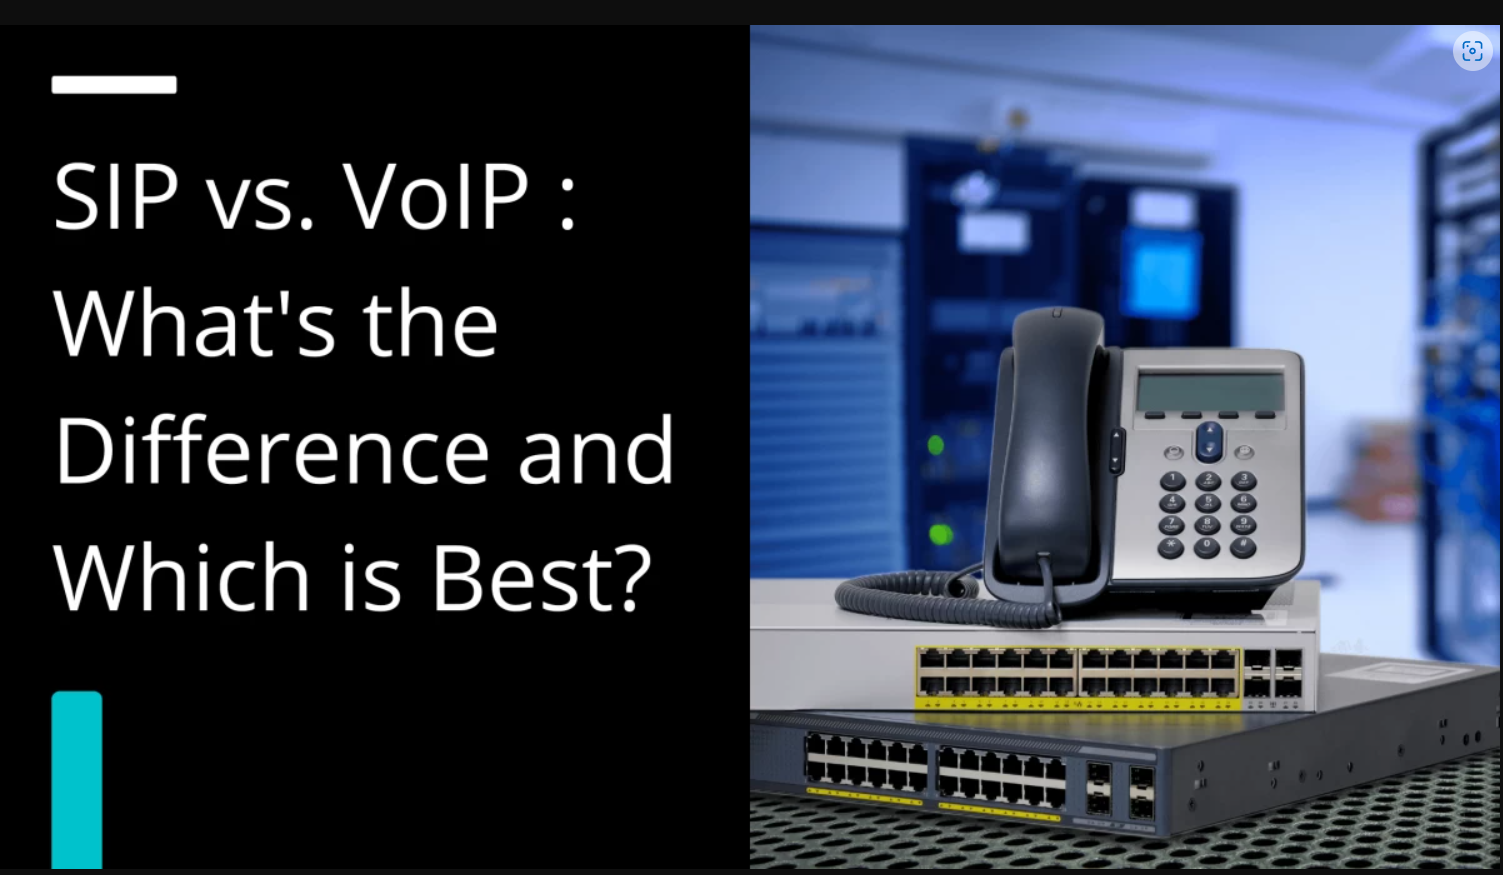 SIP vs. VoIP: What’s the Difference and Which is Best